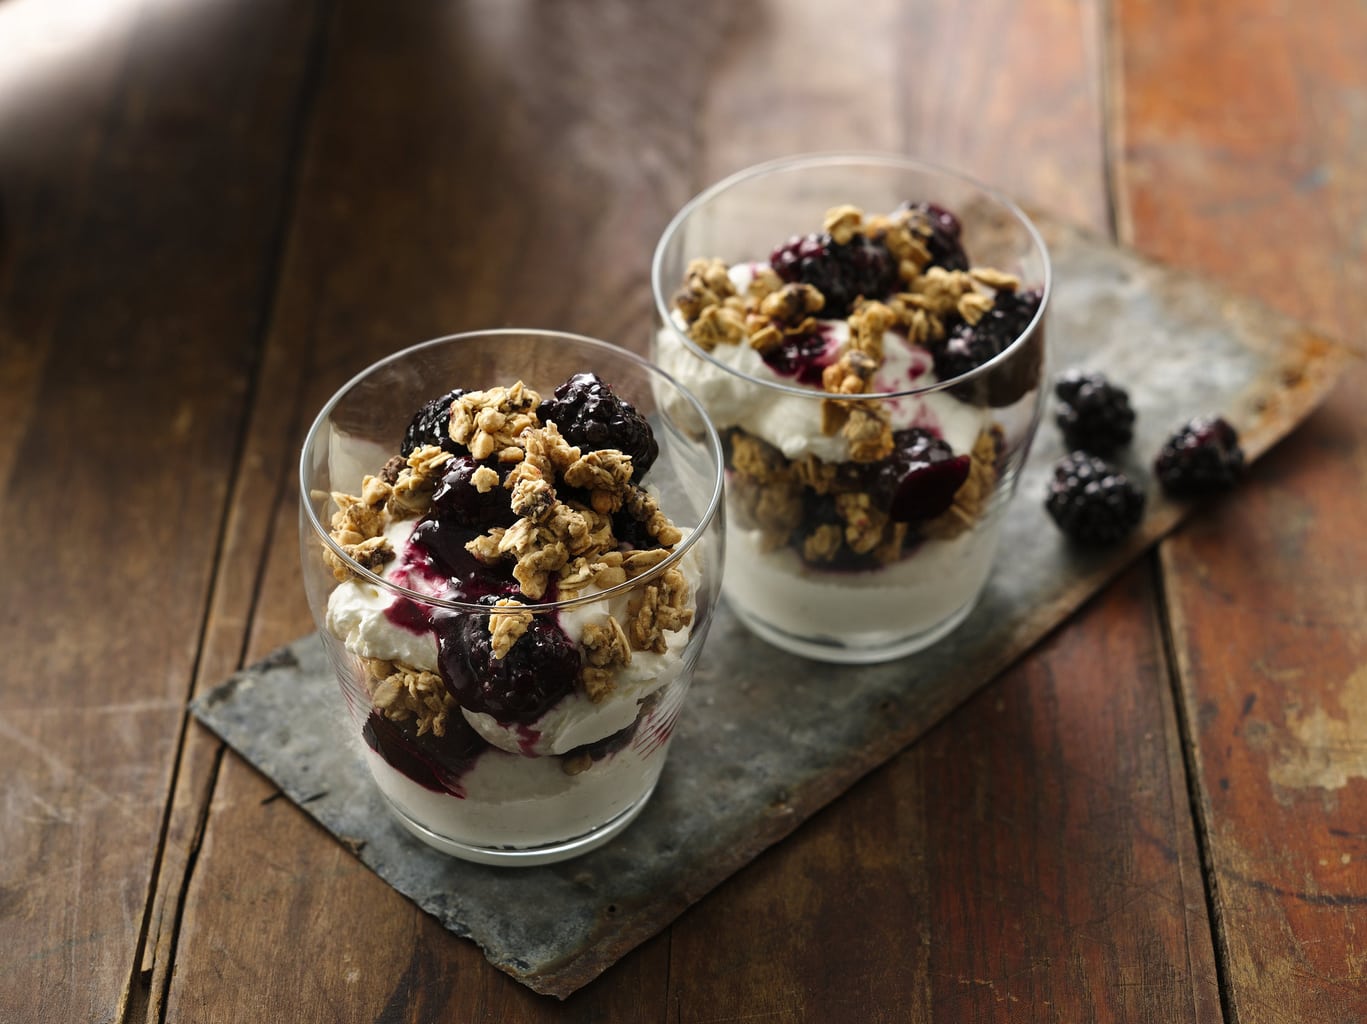 Two blackberry and granola parfaits sit on a tray on a wooden table.